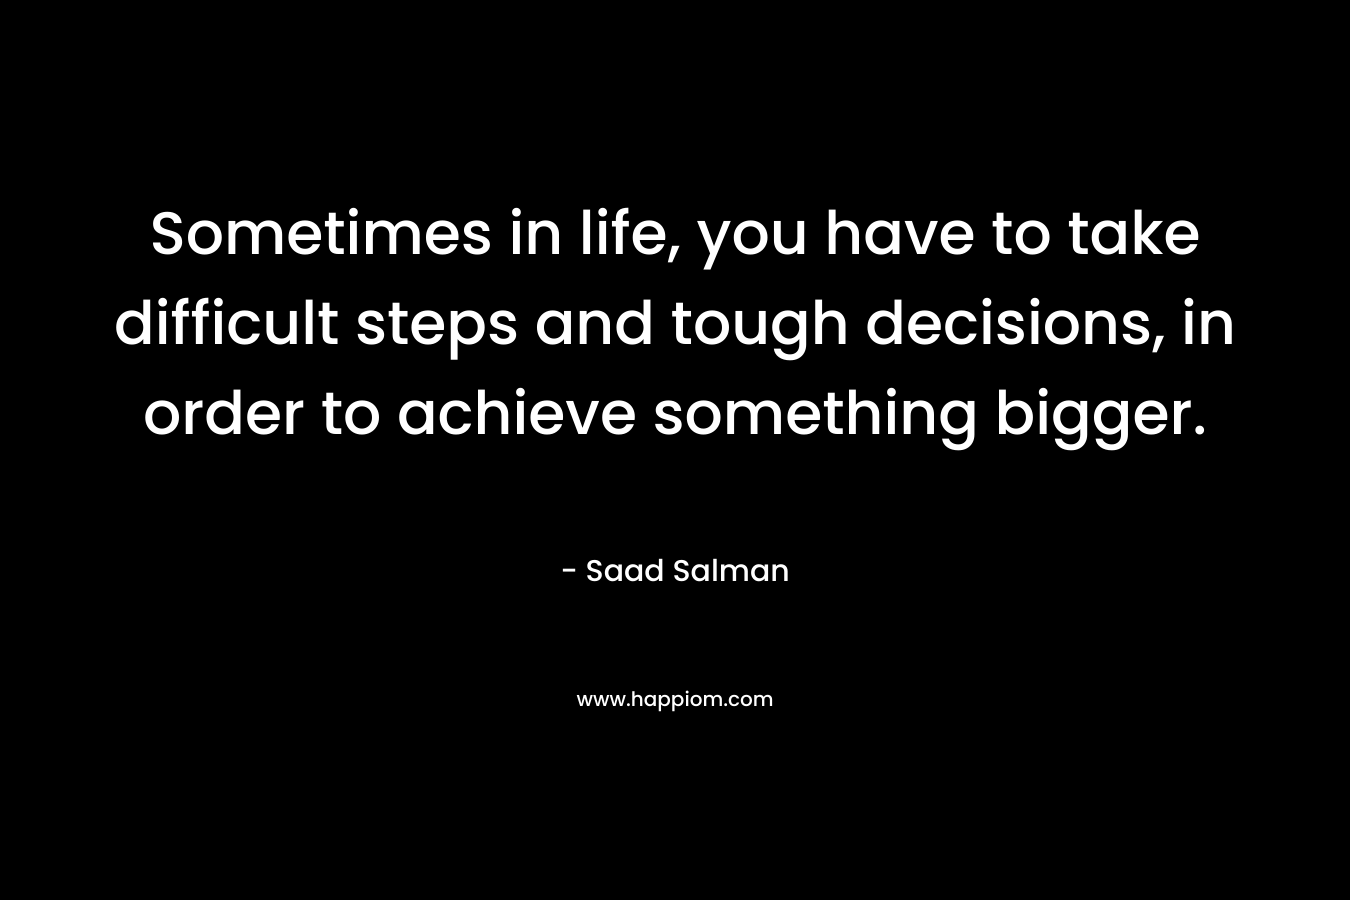 Sometimes in life, you have to take difficult steps and tough decisions, in order to achieve something bigger. – Saad Salman